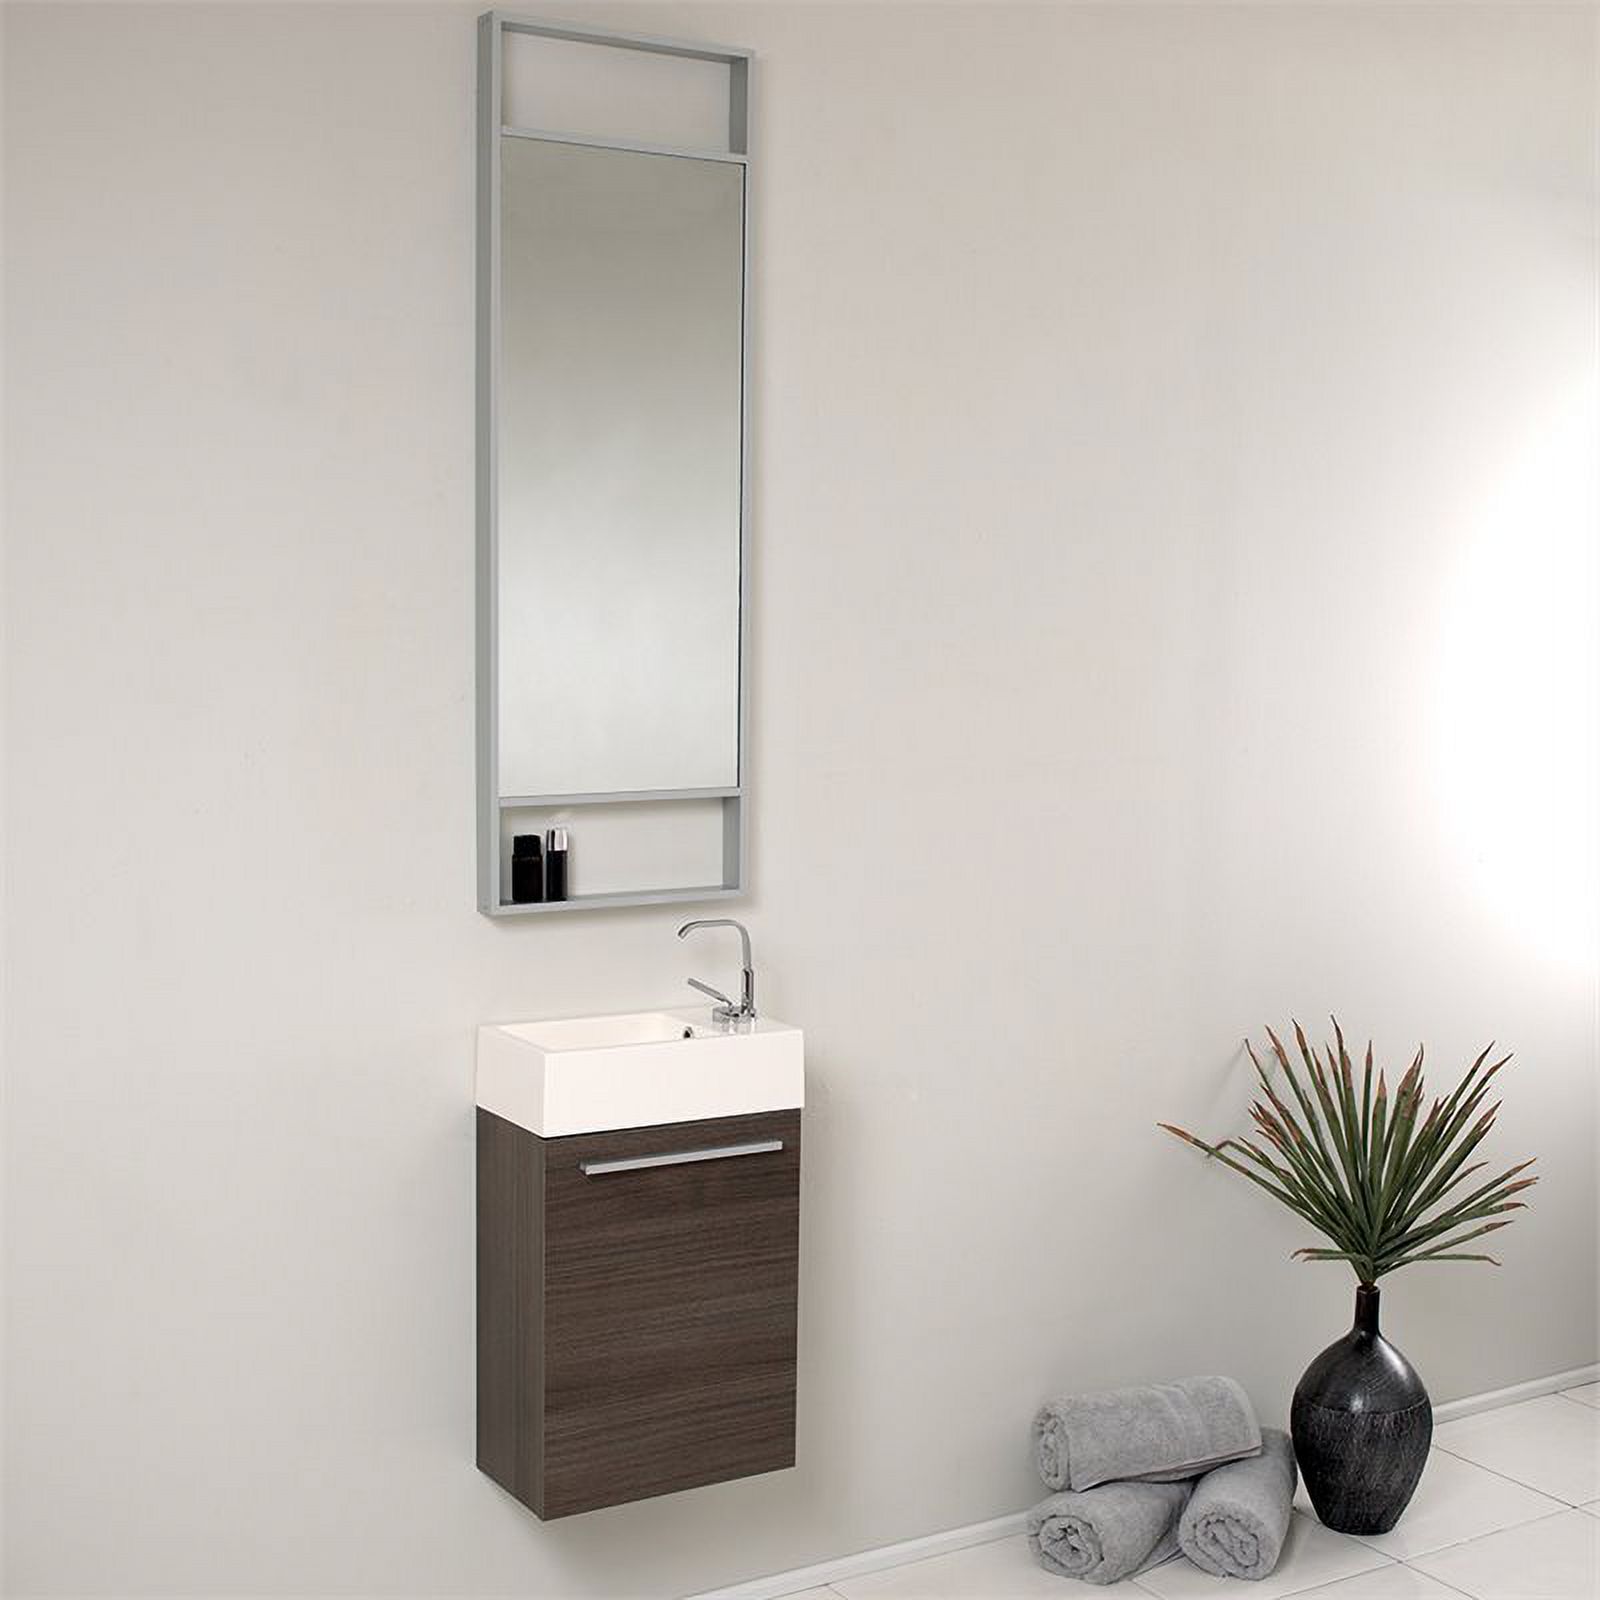 Pulito Small Modern Bathroom Vanity with Tall Mirror - image 2 of 7